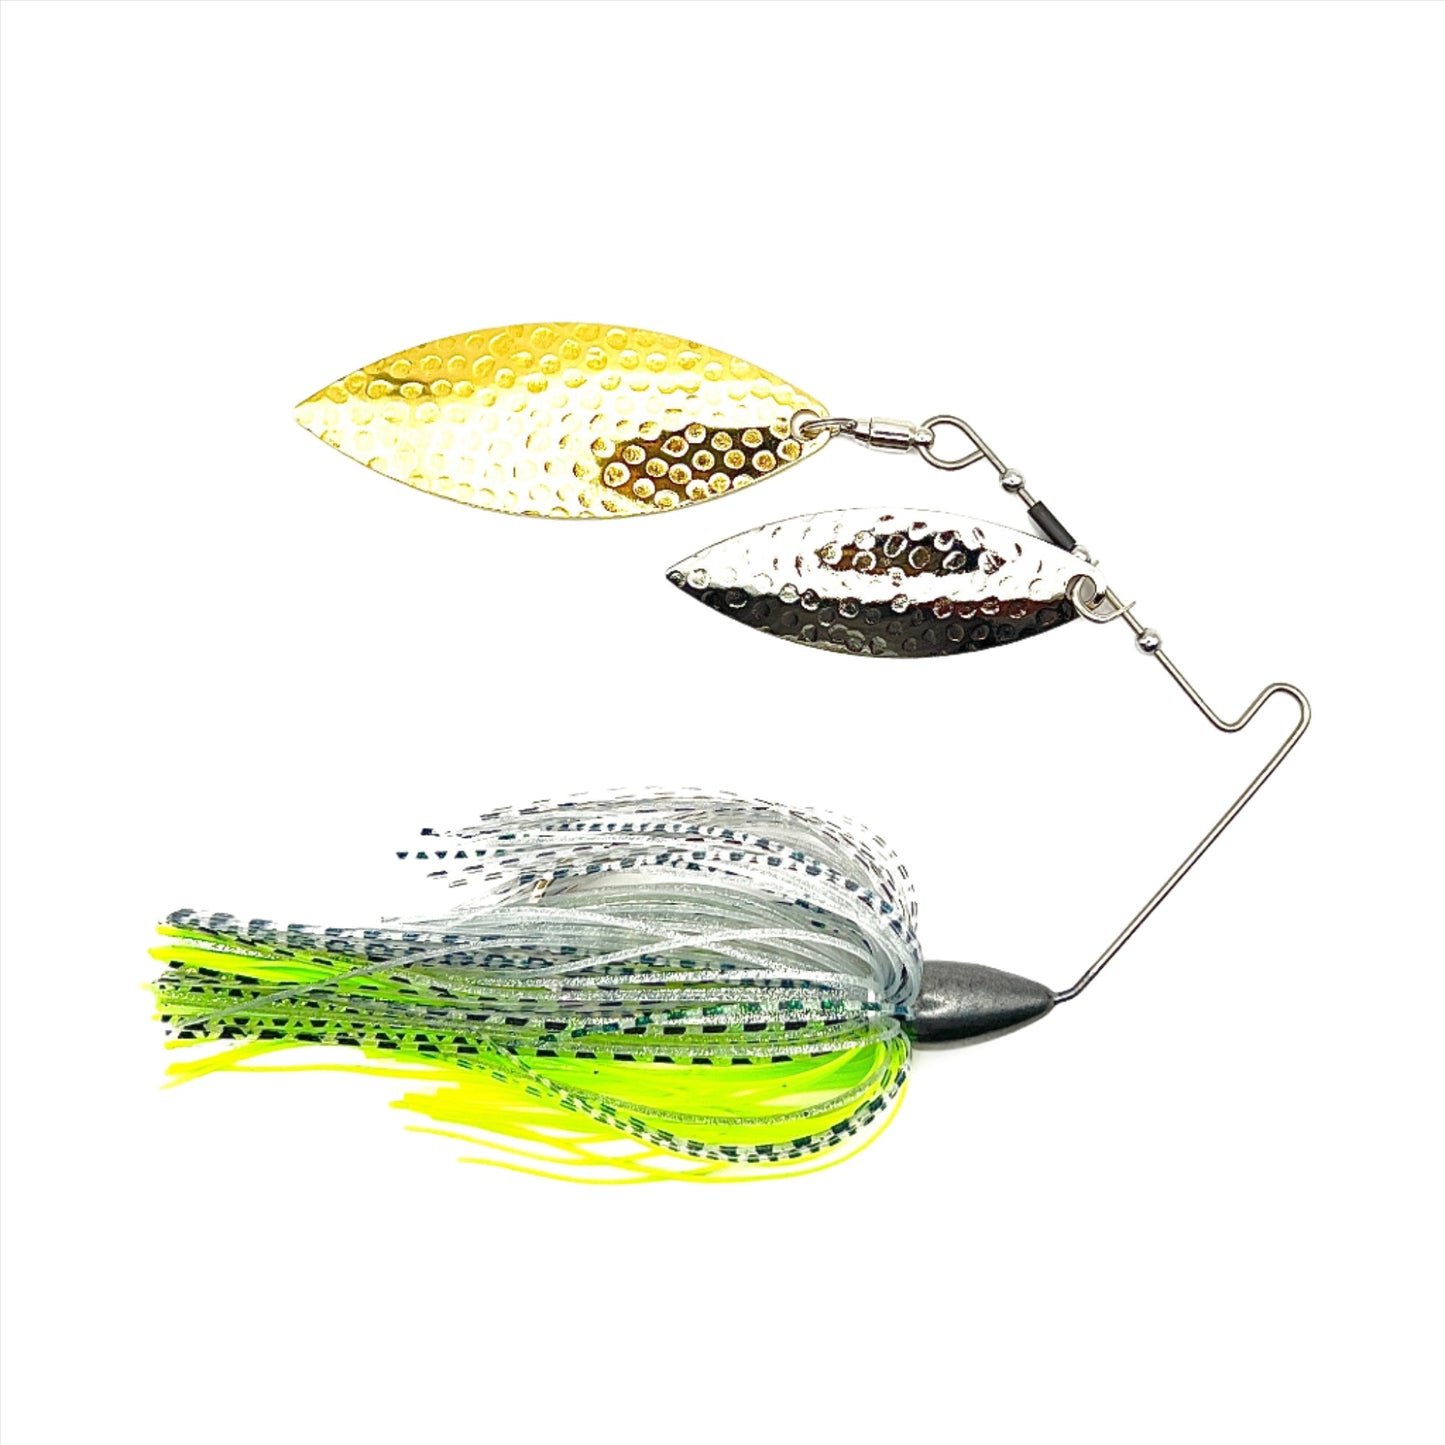 Superman Double Willow Spinnerbait